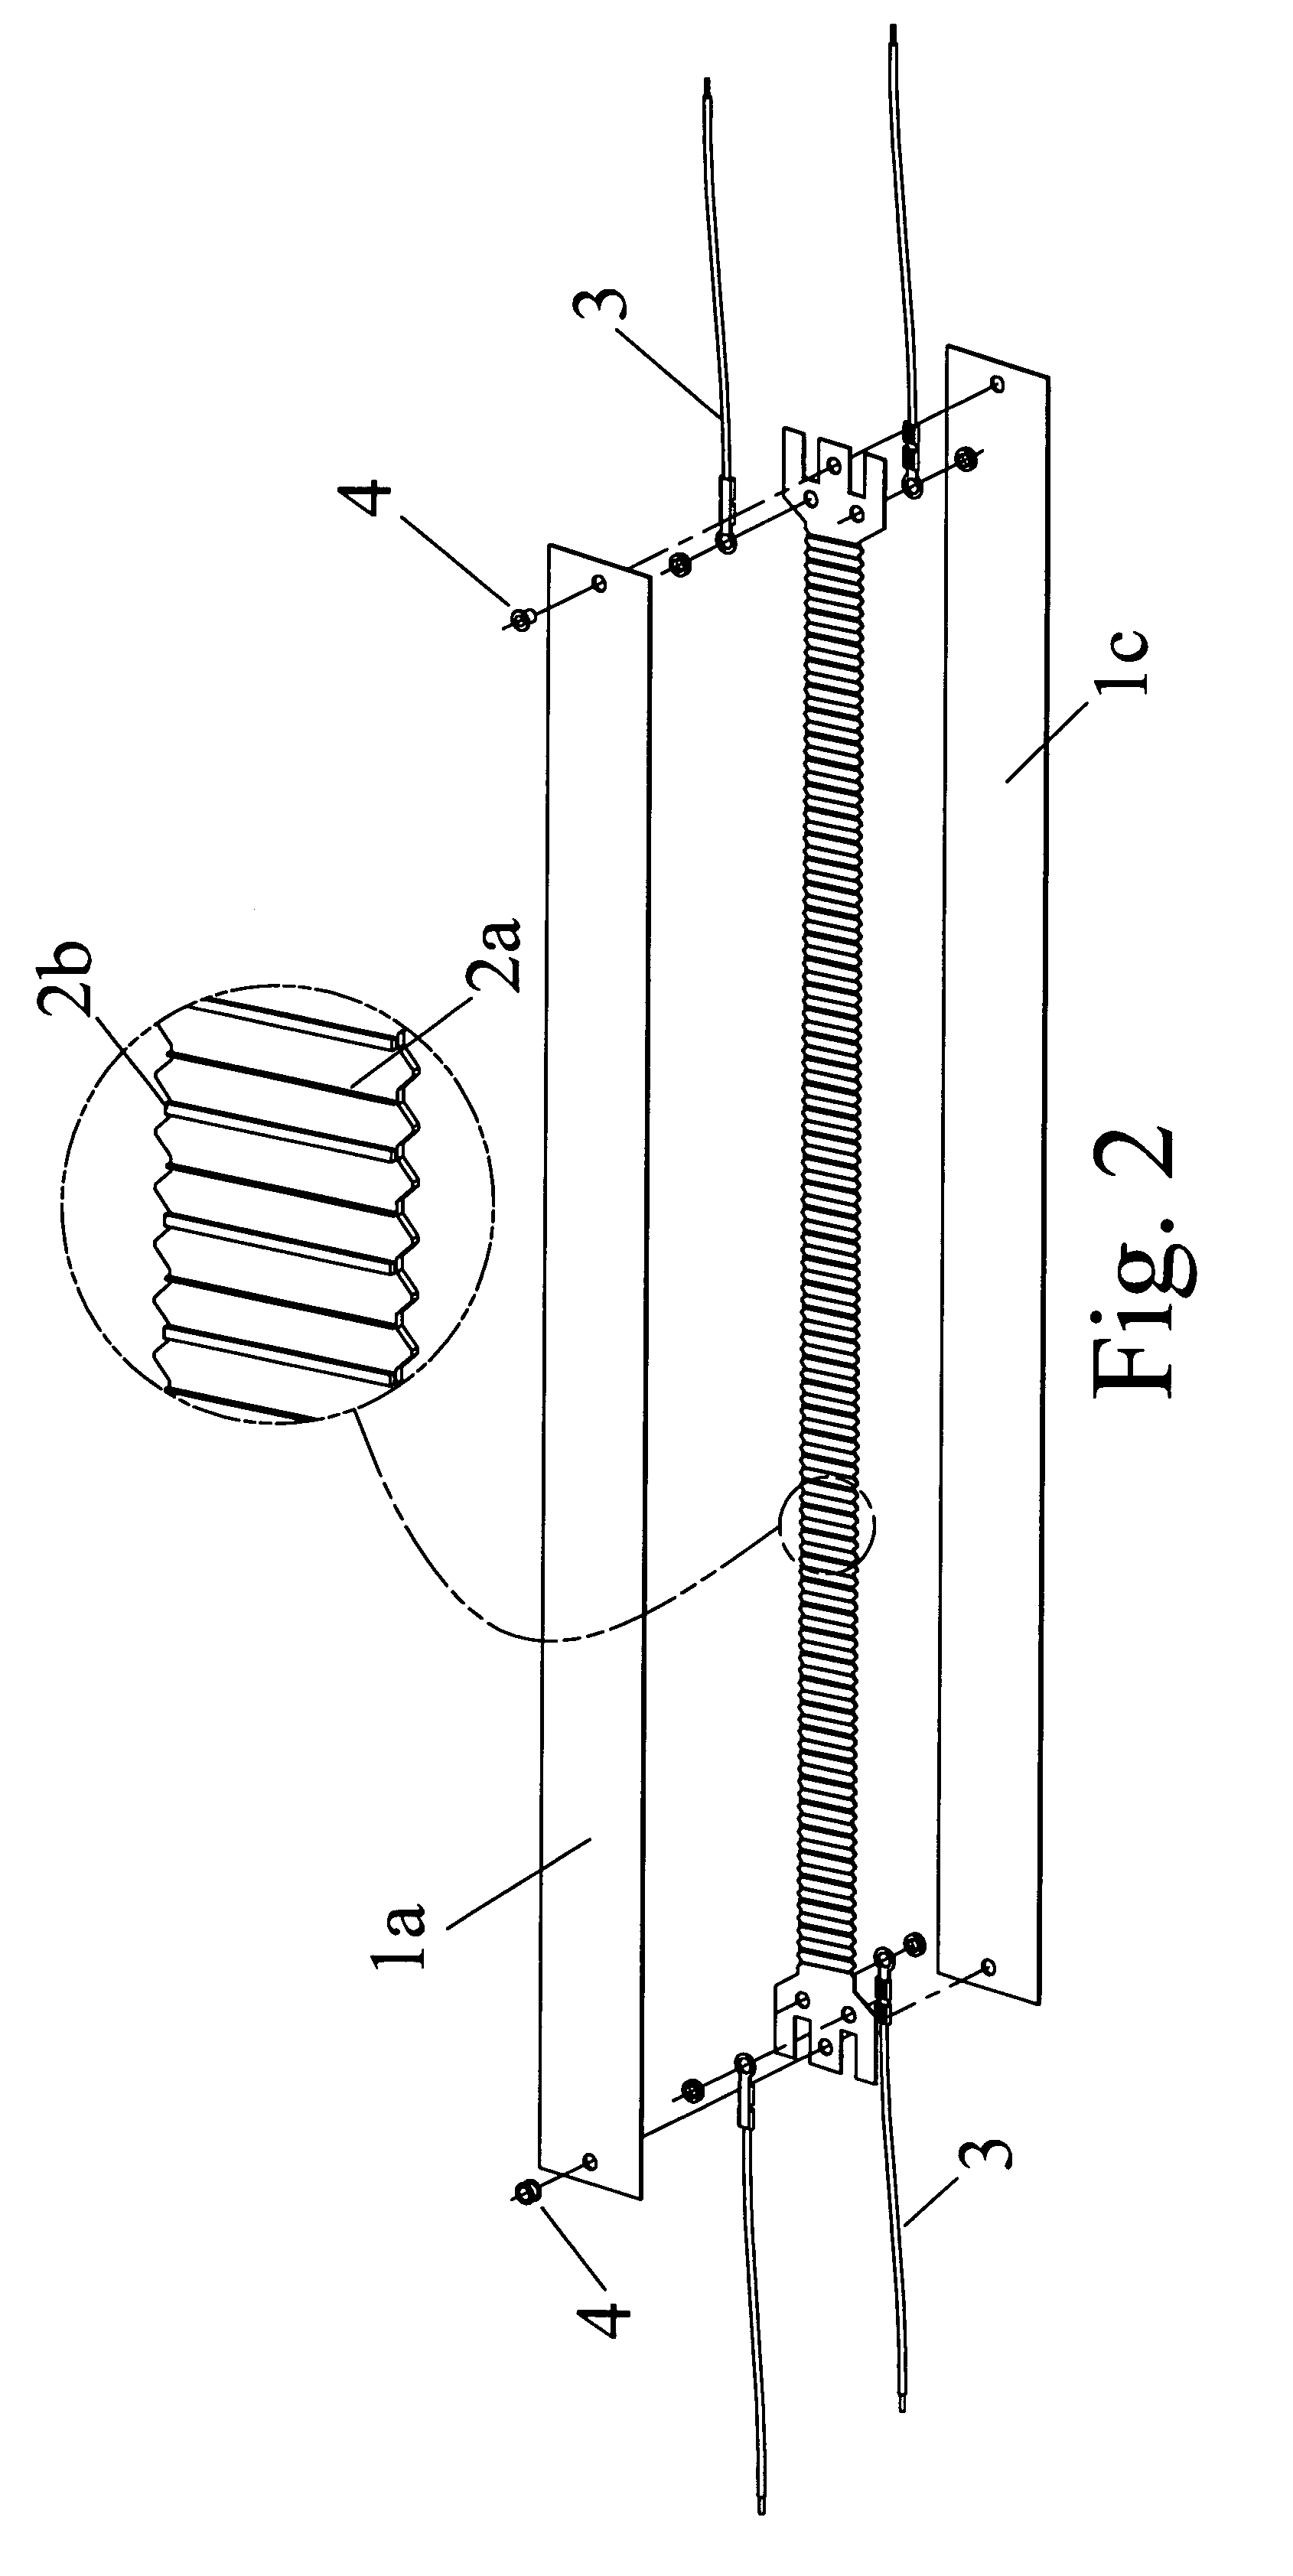 Heat element for maintaining laminator at predetermined working temperature